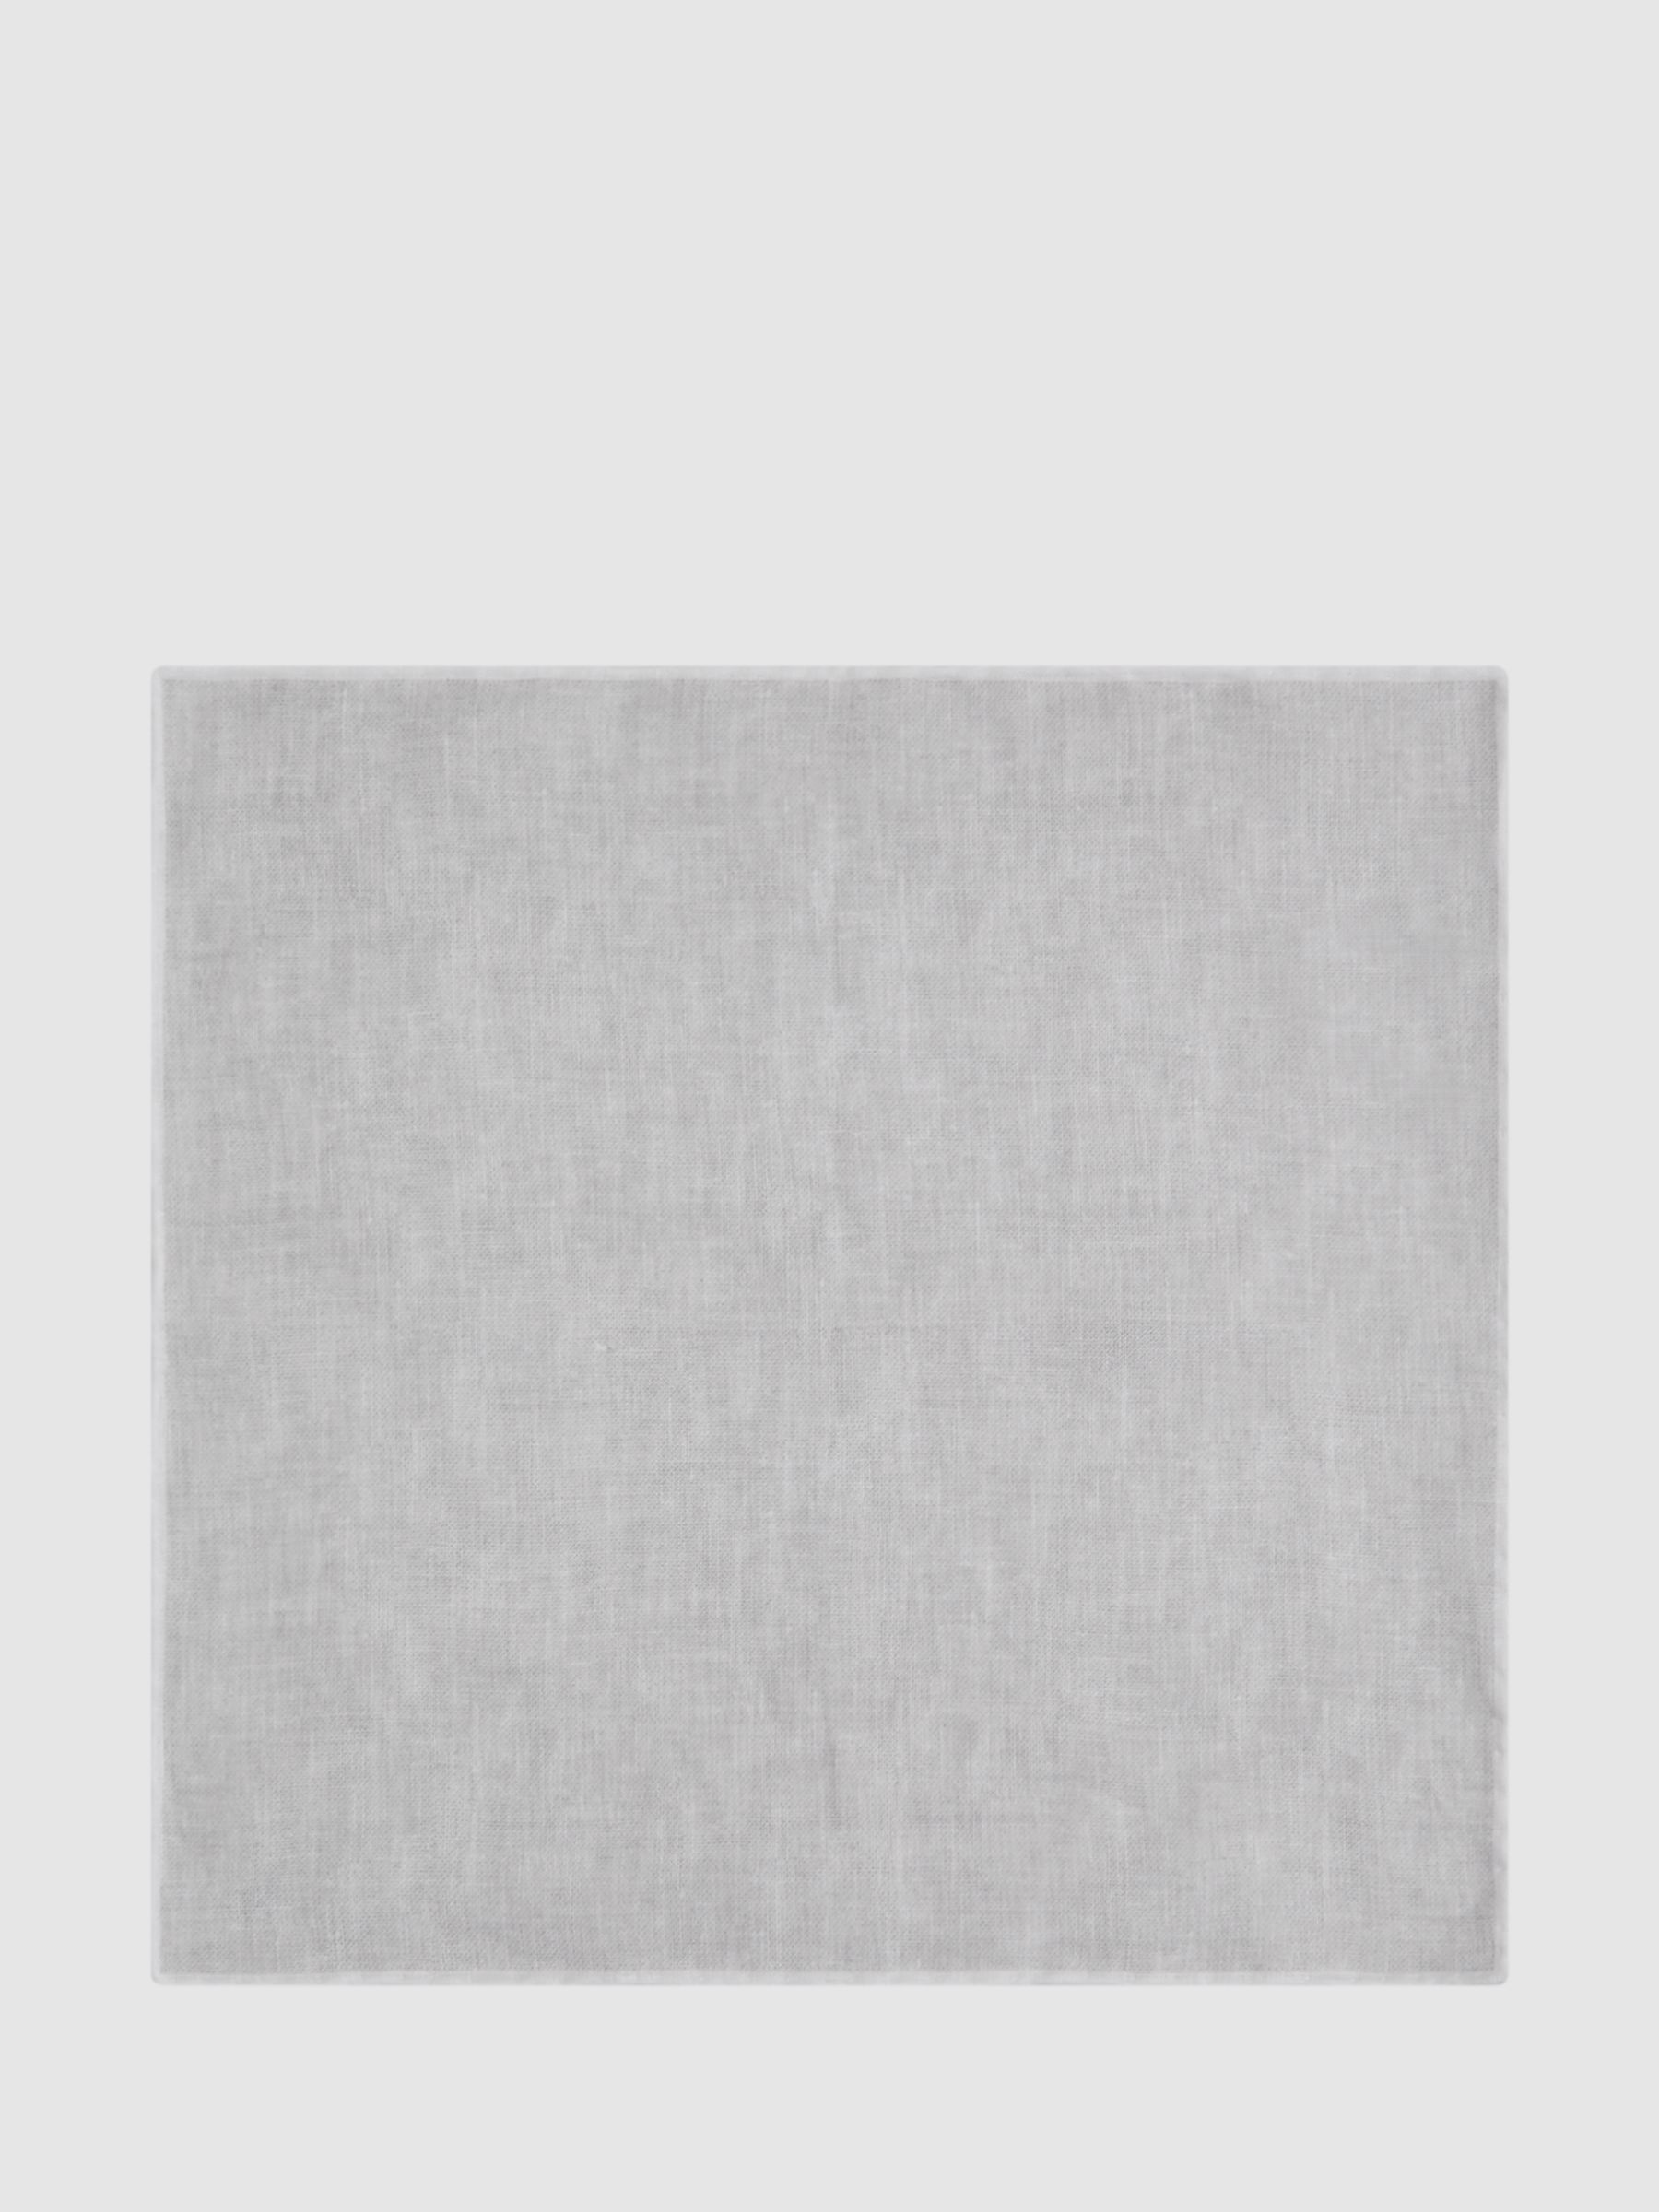 Buy Reiss Siracusa Linen Pocket Square Online at johnlewis.com